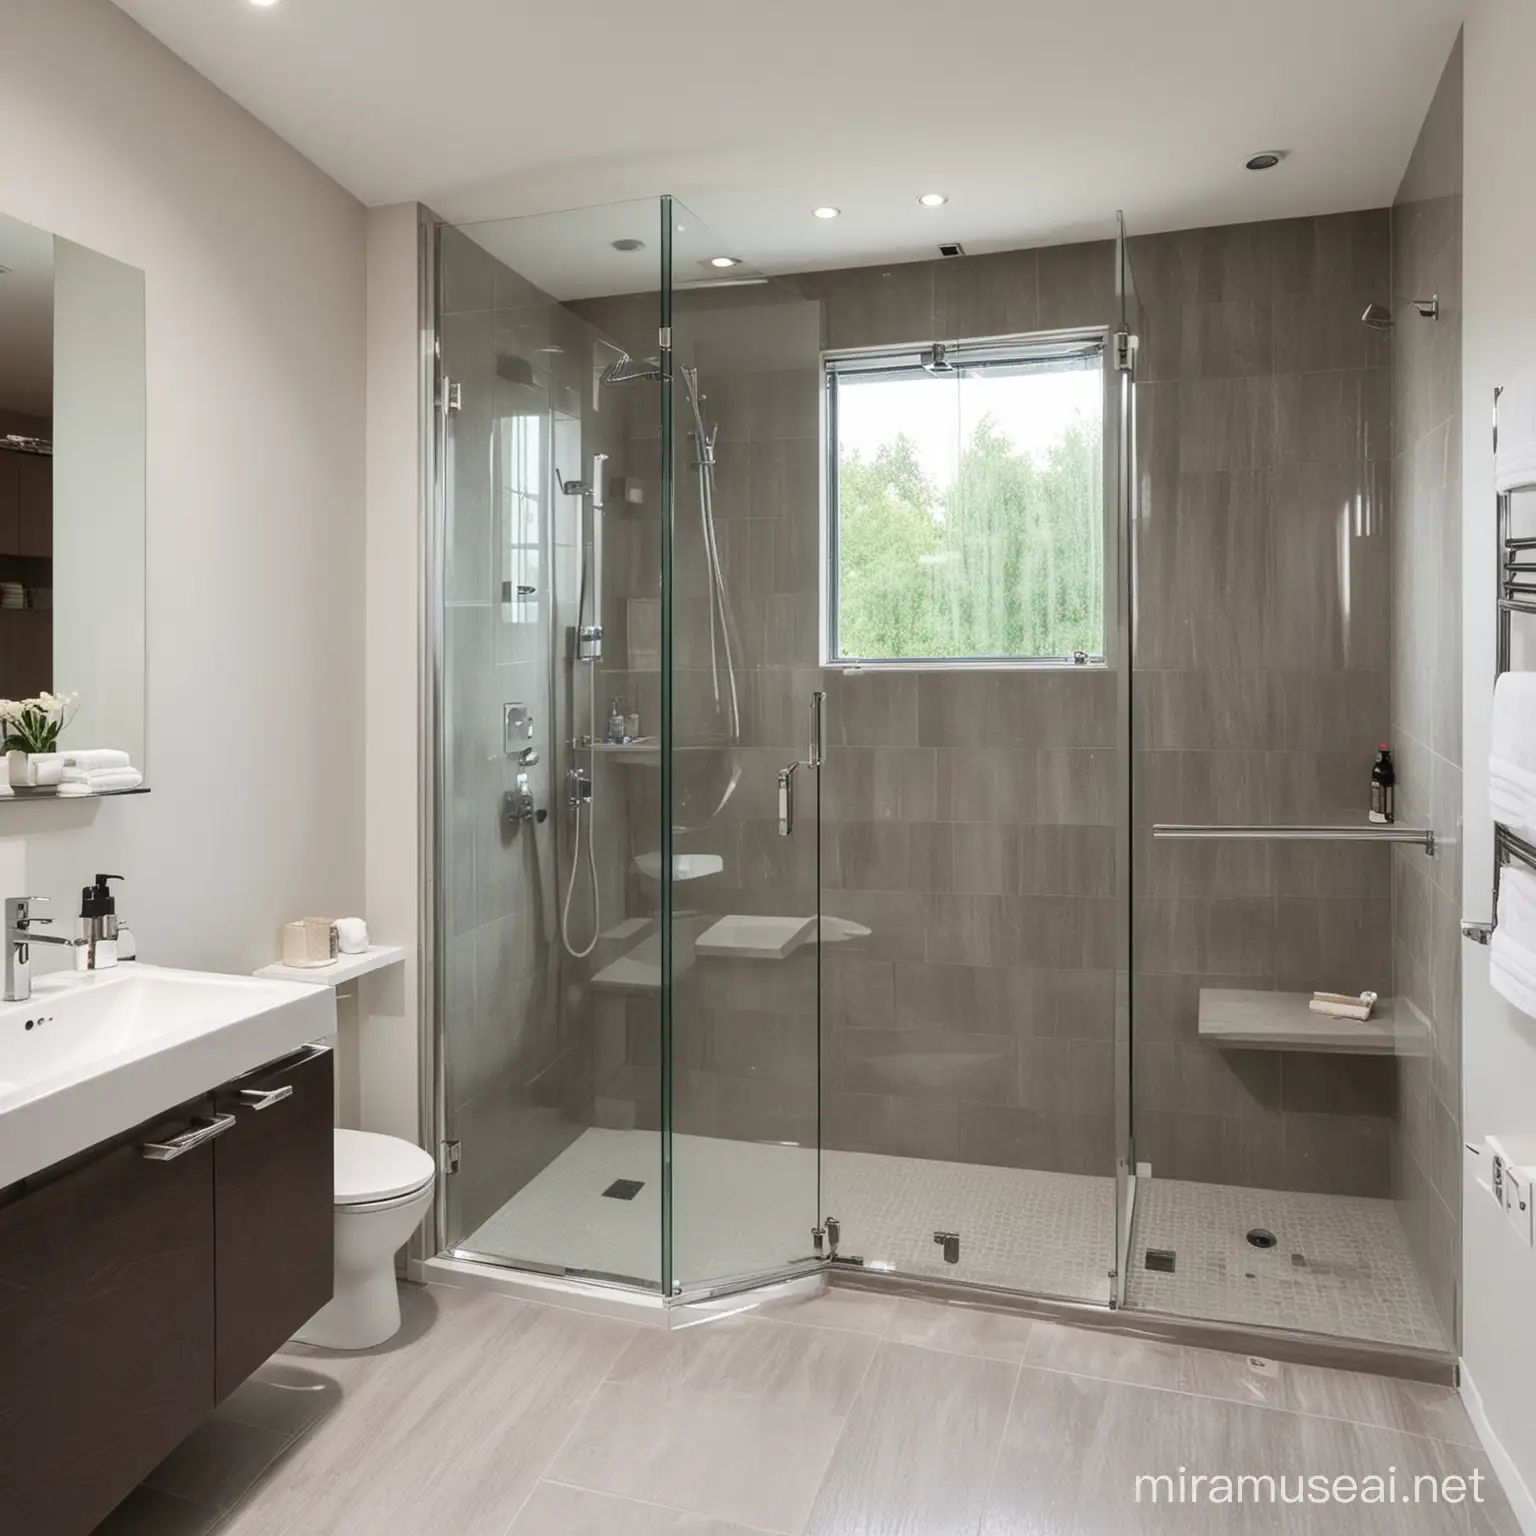 Luxurious SpaLike Bathroom with Modern Rainfall Shower and Relaxing Ambiance